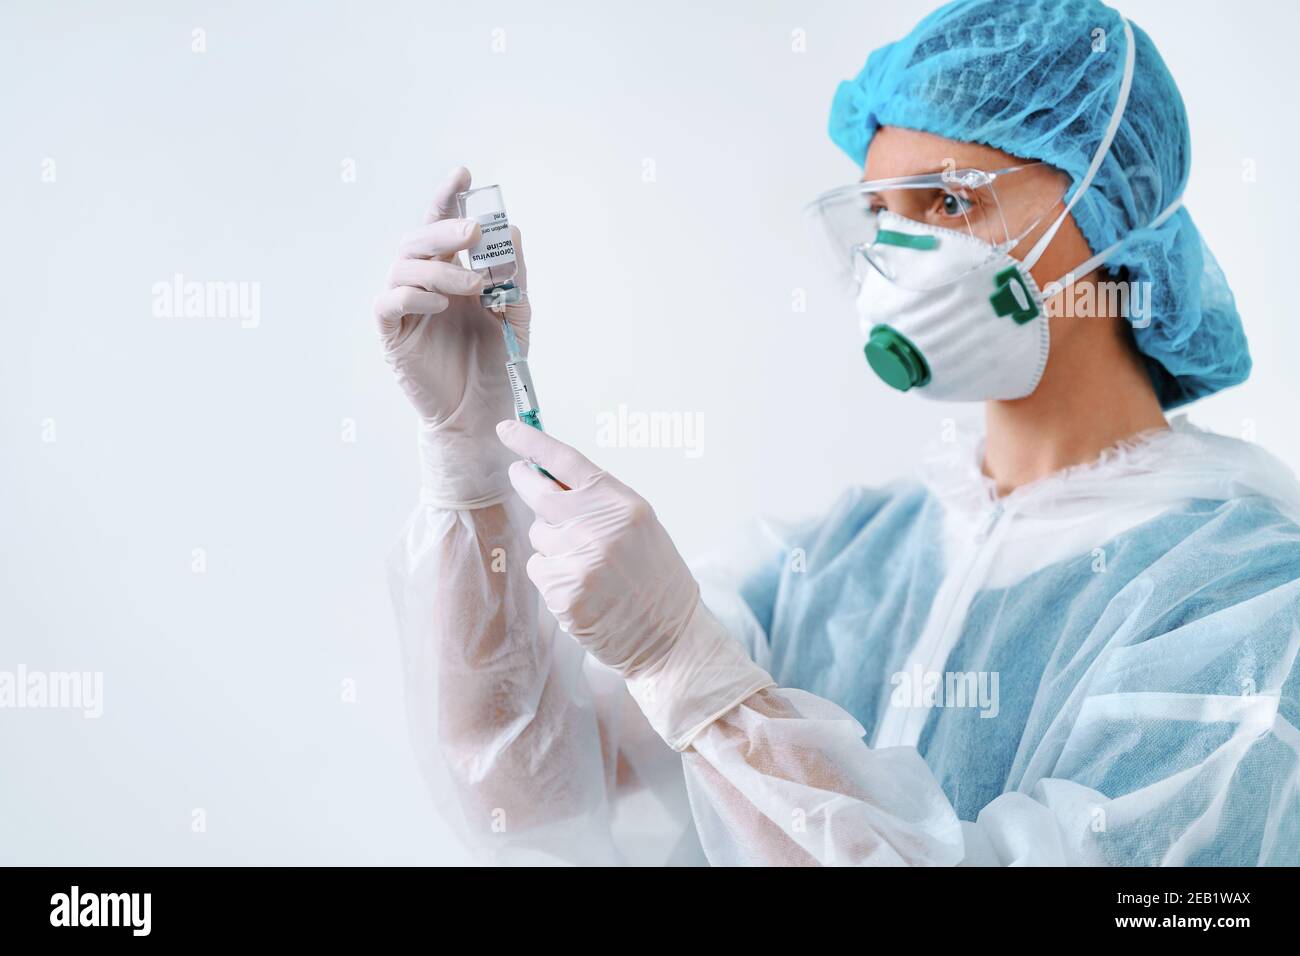 Nurse in protective suit and mask holds an injection syringe and vaccine. Biological hazard. Stock Photo